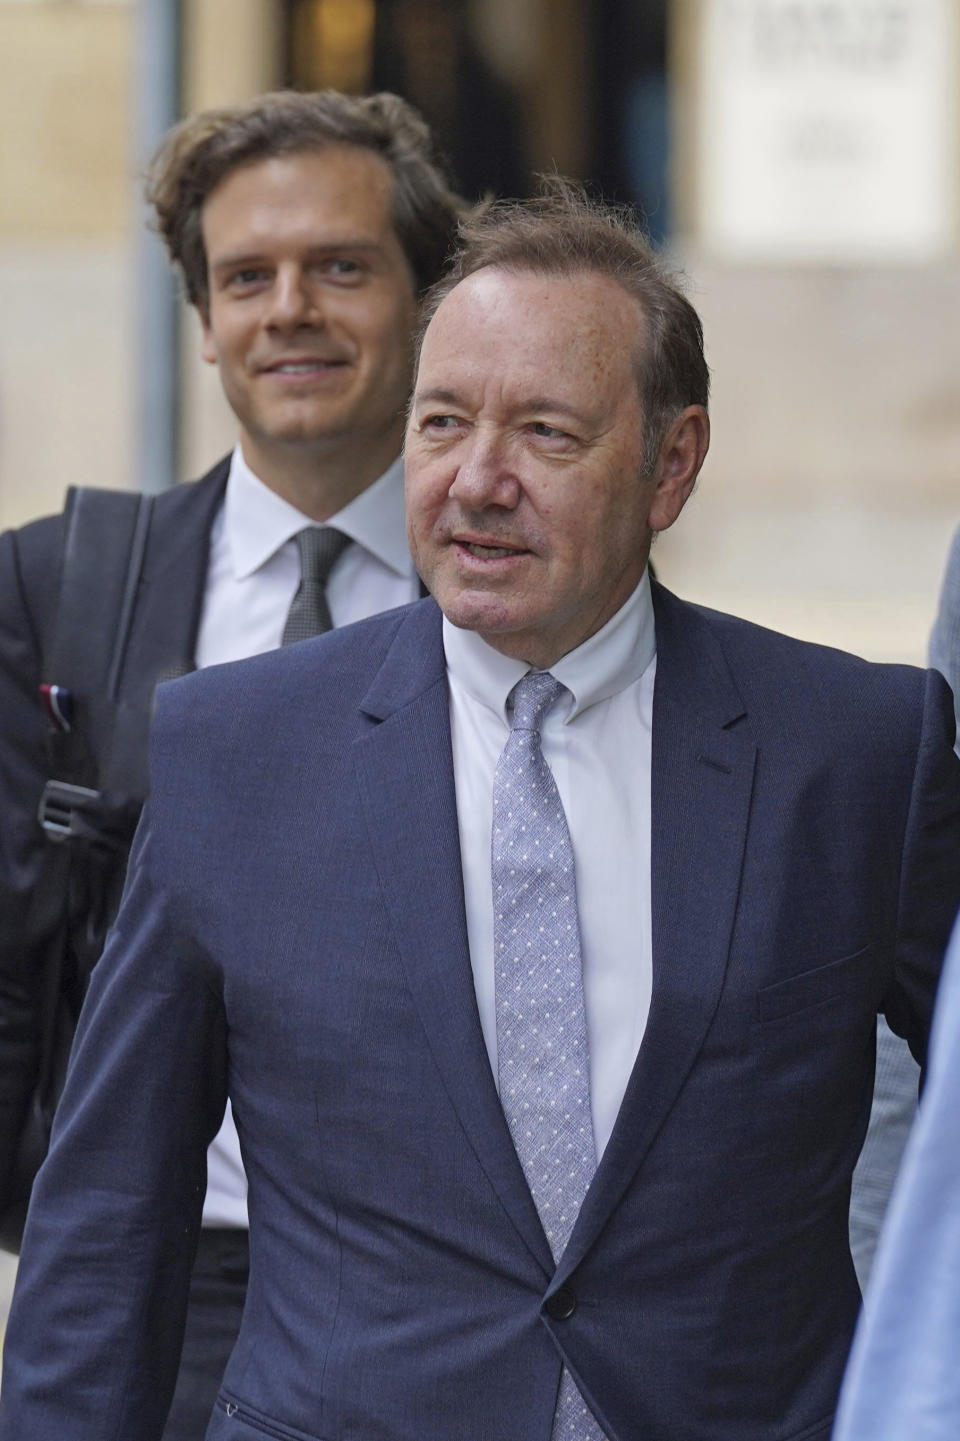 US Actor Kevin Spacey, front, arrives at Southwark Crown Court, London, Tuesday, July 4, 2023. Spacey is charged with three counts of indecent assault, seven counts of sexual assault, one count of causing a person to engage in sexual activity without consent and one count of causing a person to engage in penetrative sexual activity without consent between 2001 and 2005. (Lucy North/PA via AP)